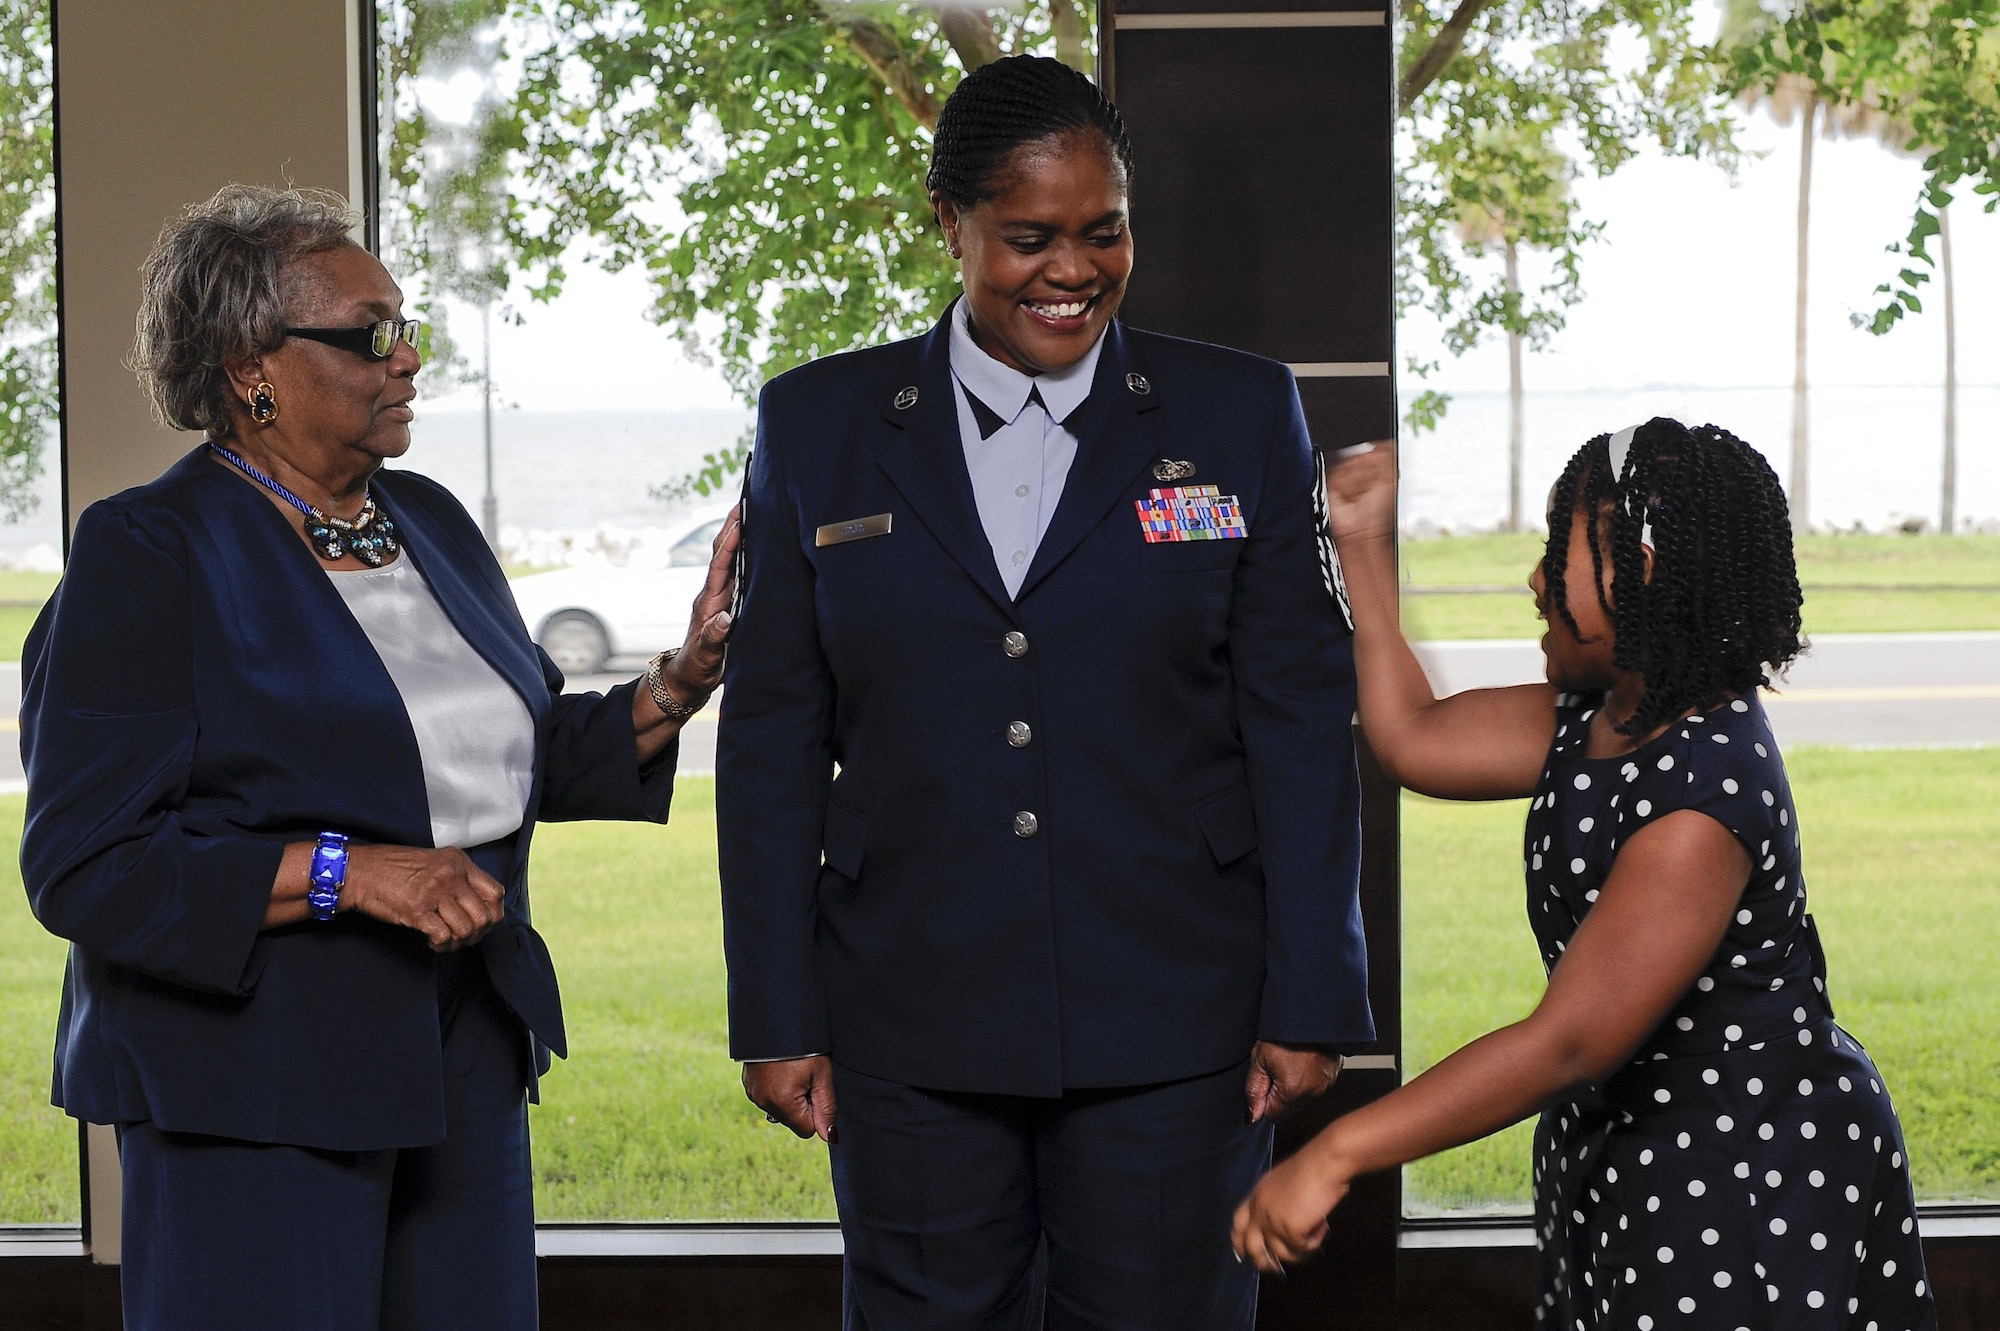 Chief Master Sgt. Lessie Hicks, mission support chief with the 290th Joint Communications Support Squadron (JCSS), center, gets her chief stripes tacked on by her family, July 29, 2016, at MacDill Air Force Base, Fla. Hicks is the first African-American and female chief at the 290th JCSS. (U.S. Air Force photo by Airman 1st Class Mariette Adams)